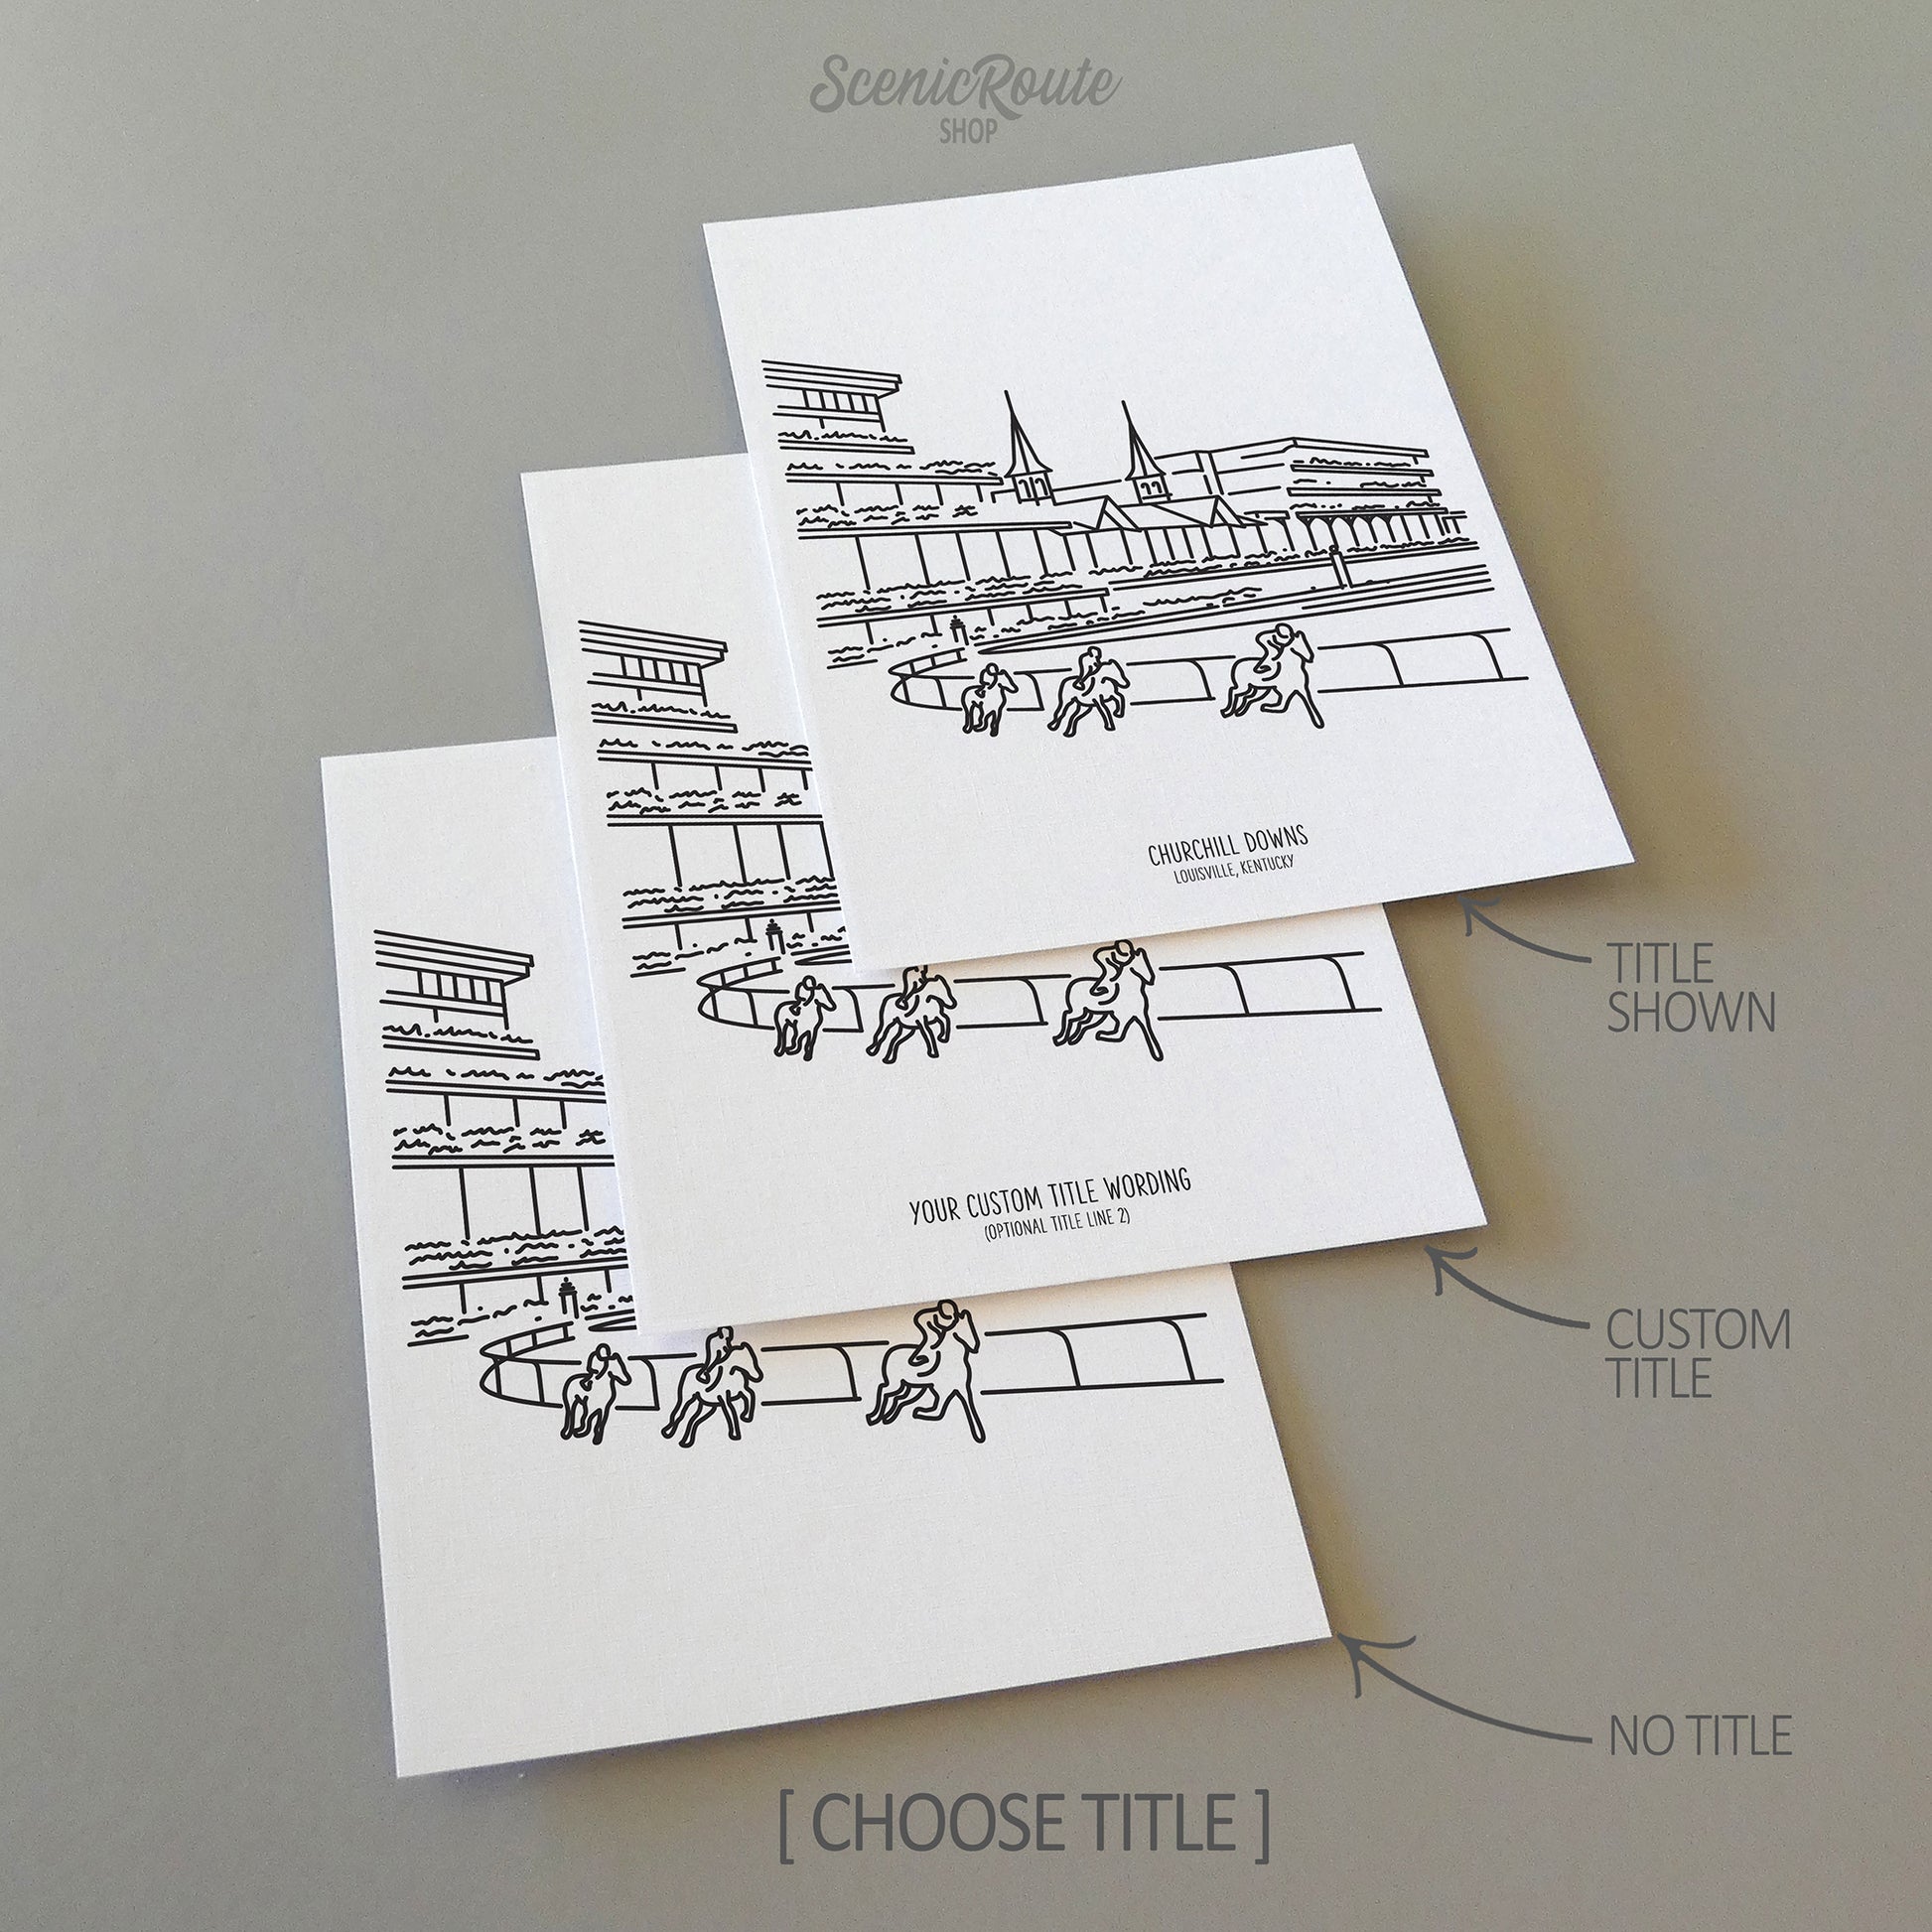 Three line art drawings of Churchill Downs in Louisville Kentucky on white linen paper with a gray background.  The pieces are shown with title options that can be chosen and personalized.